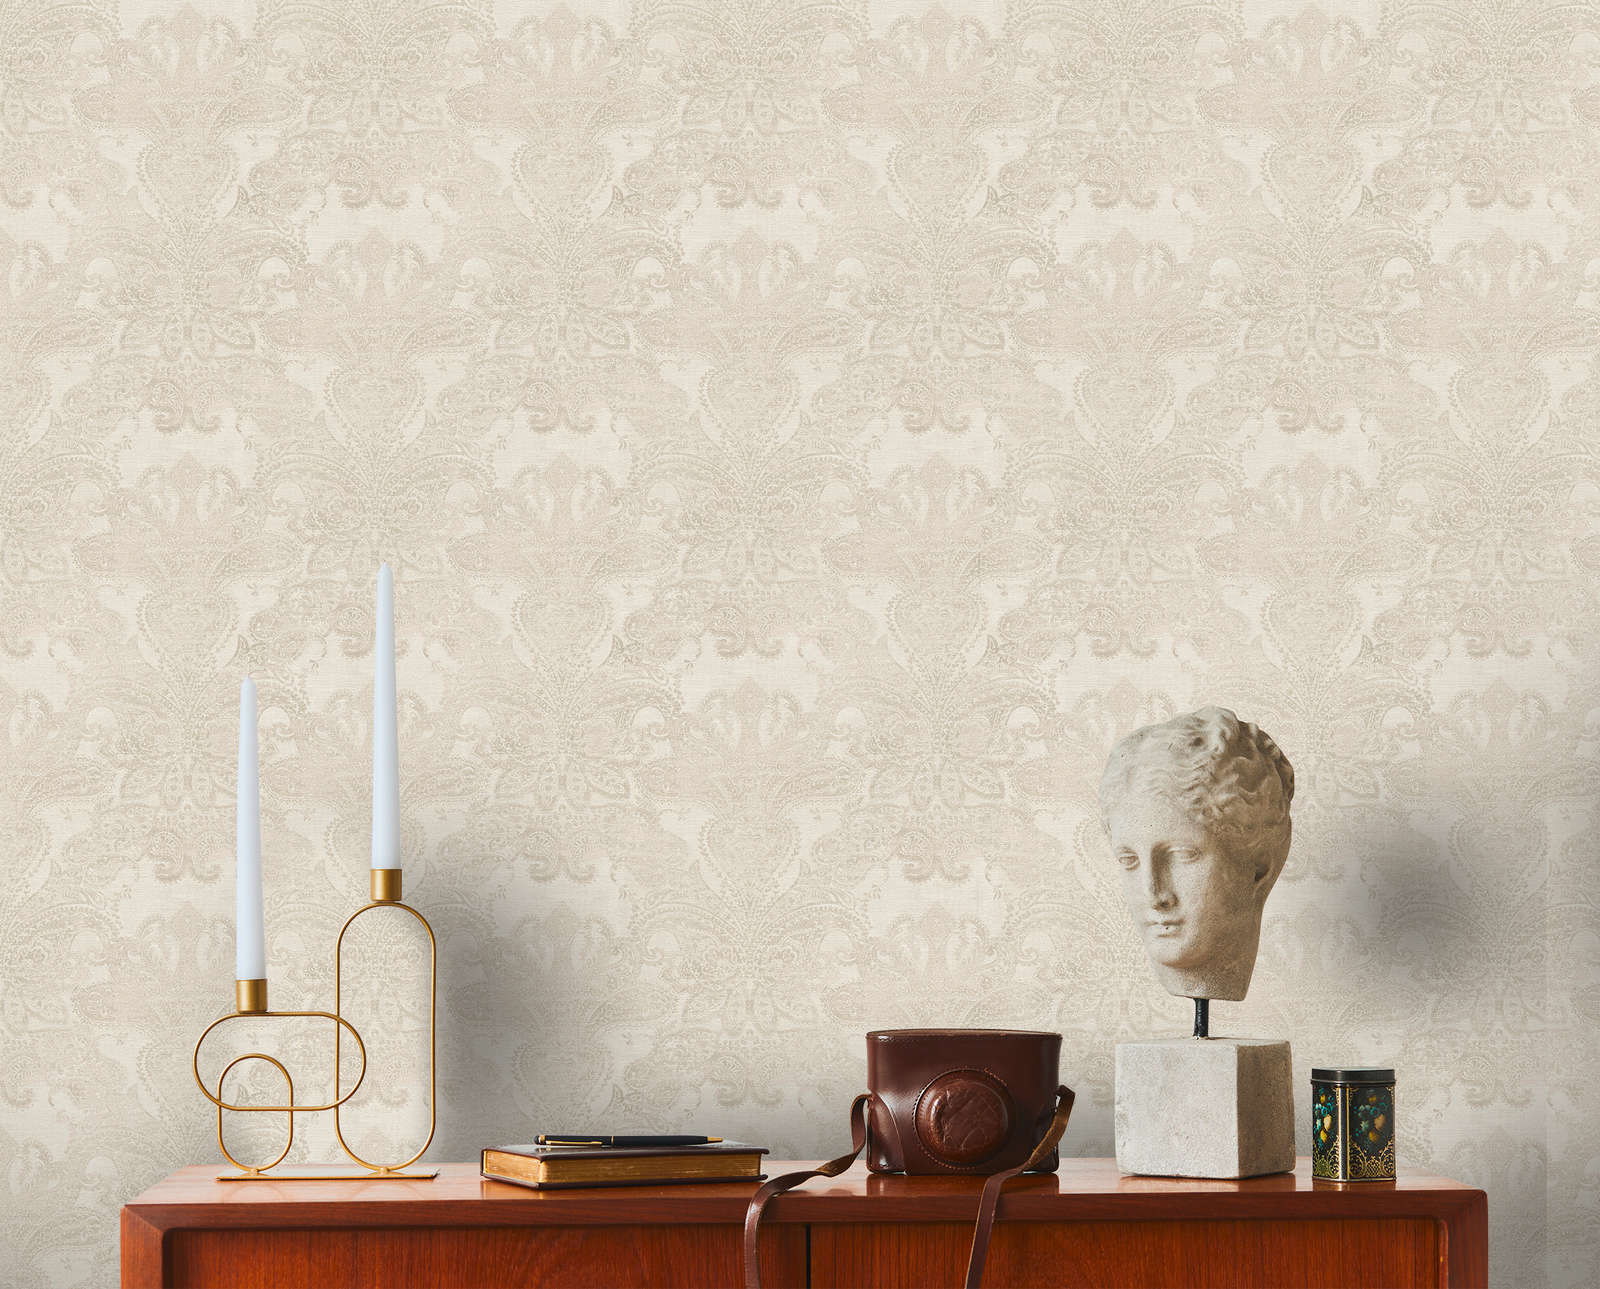             Baroque wallpaper with large ornaments - white, cream, grey
        